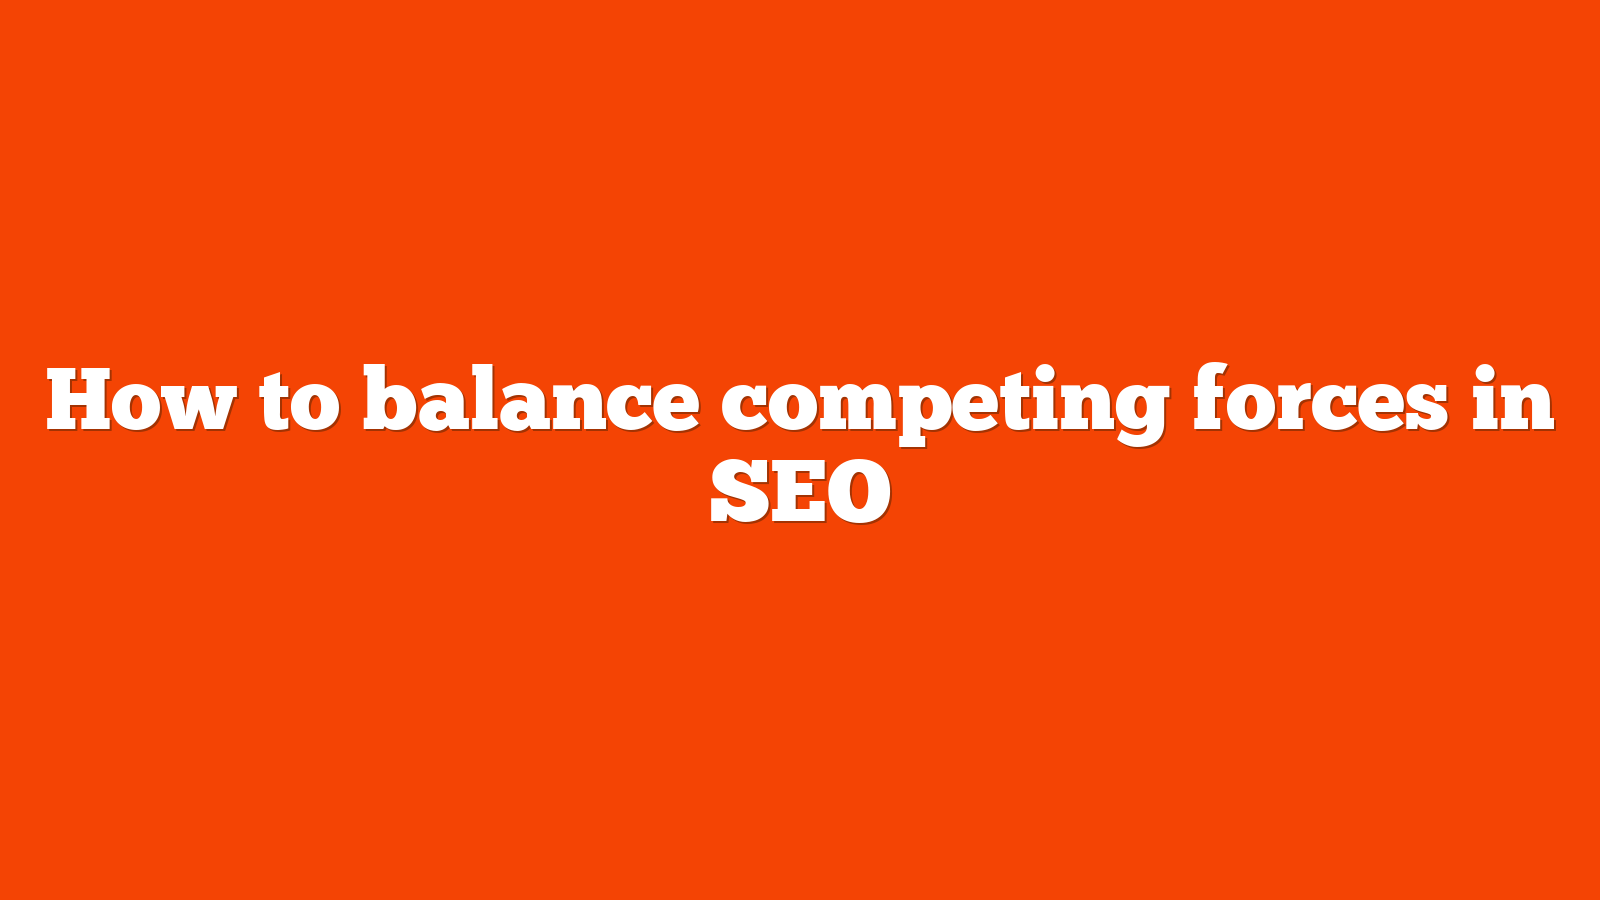 How to balance competing forces in SEO